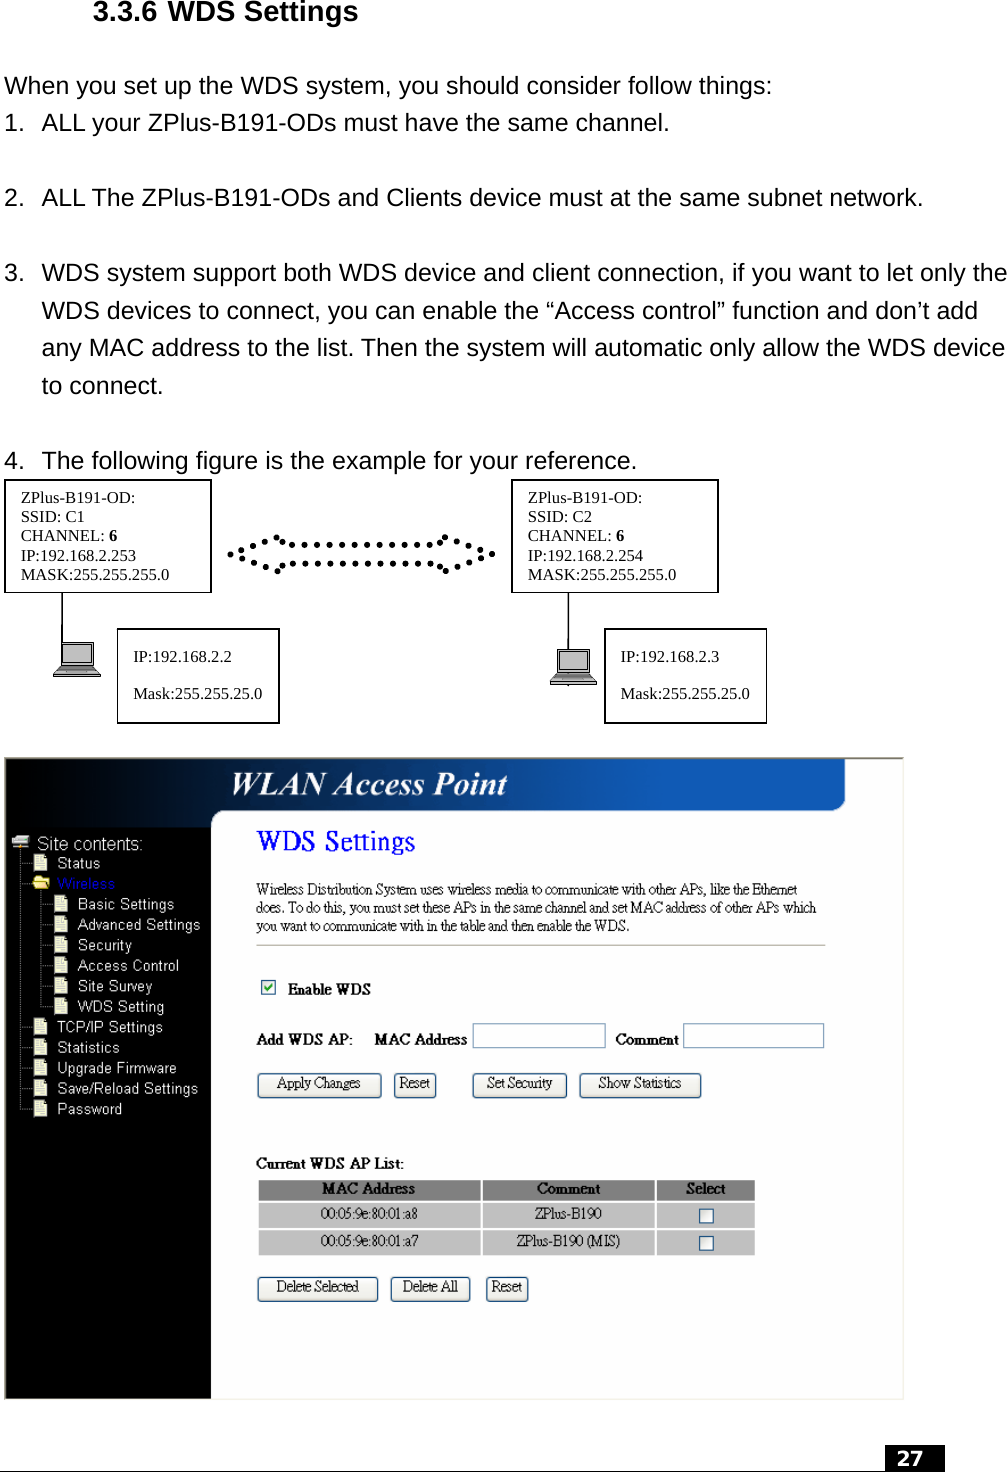 3.3.6 WDS Settings When you set up the WDS system, you should consider follow things: 1.  ALL your ZPlus-B191-ODs must have the same channel.  2.  ALL The ZPlus-B191-ODs and Clients device must at the same subnet network.  3.  WDS system support both WDS device and client connection, if you want to let only the WDS devices to connect, you can enable the “Access control” function and don’t add any MAC address to the list. Then the system will automatic only allow the WDS device to connect.  4.  The following figure is the example for your reference. IP:192.168.2.2 Mask:255.255.25.0IP:192.168.2.3 Mask:255.255.25.0ZPlus-B191-OD:   ZPlus-B191-OD:  : 6 4  5.0 SSID: C1  SSID: C2 : 6 3  5.0 CHANNEL CHANNELIP:192.168.2.25 IP:192.168.2.25MASK:255.255.25 MASK:255.255.25    27  